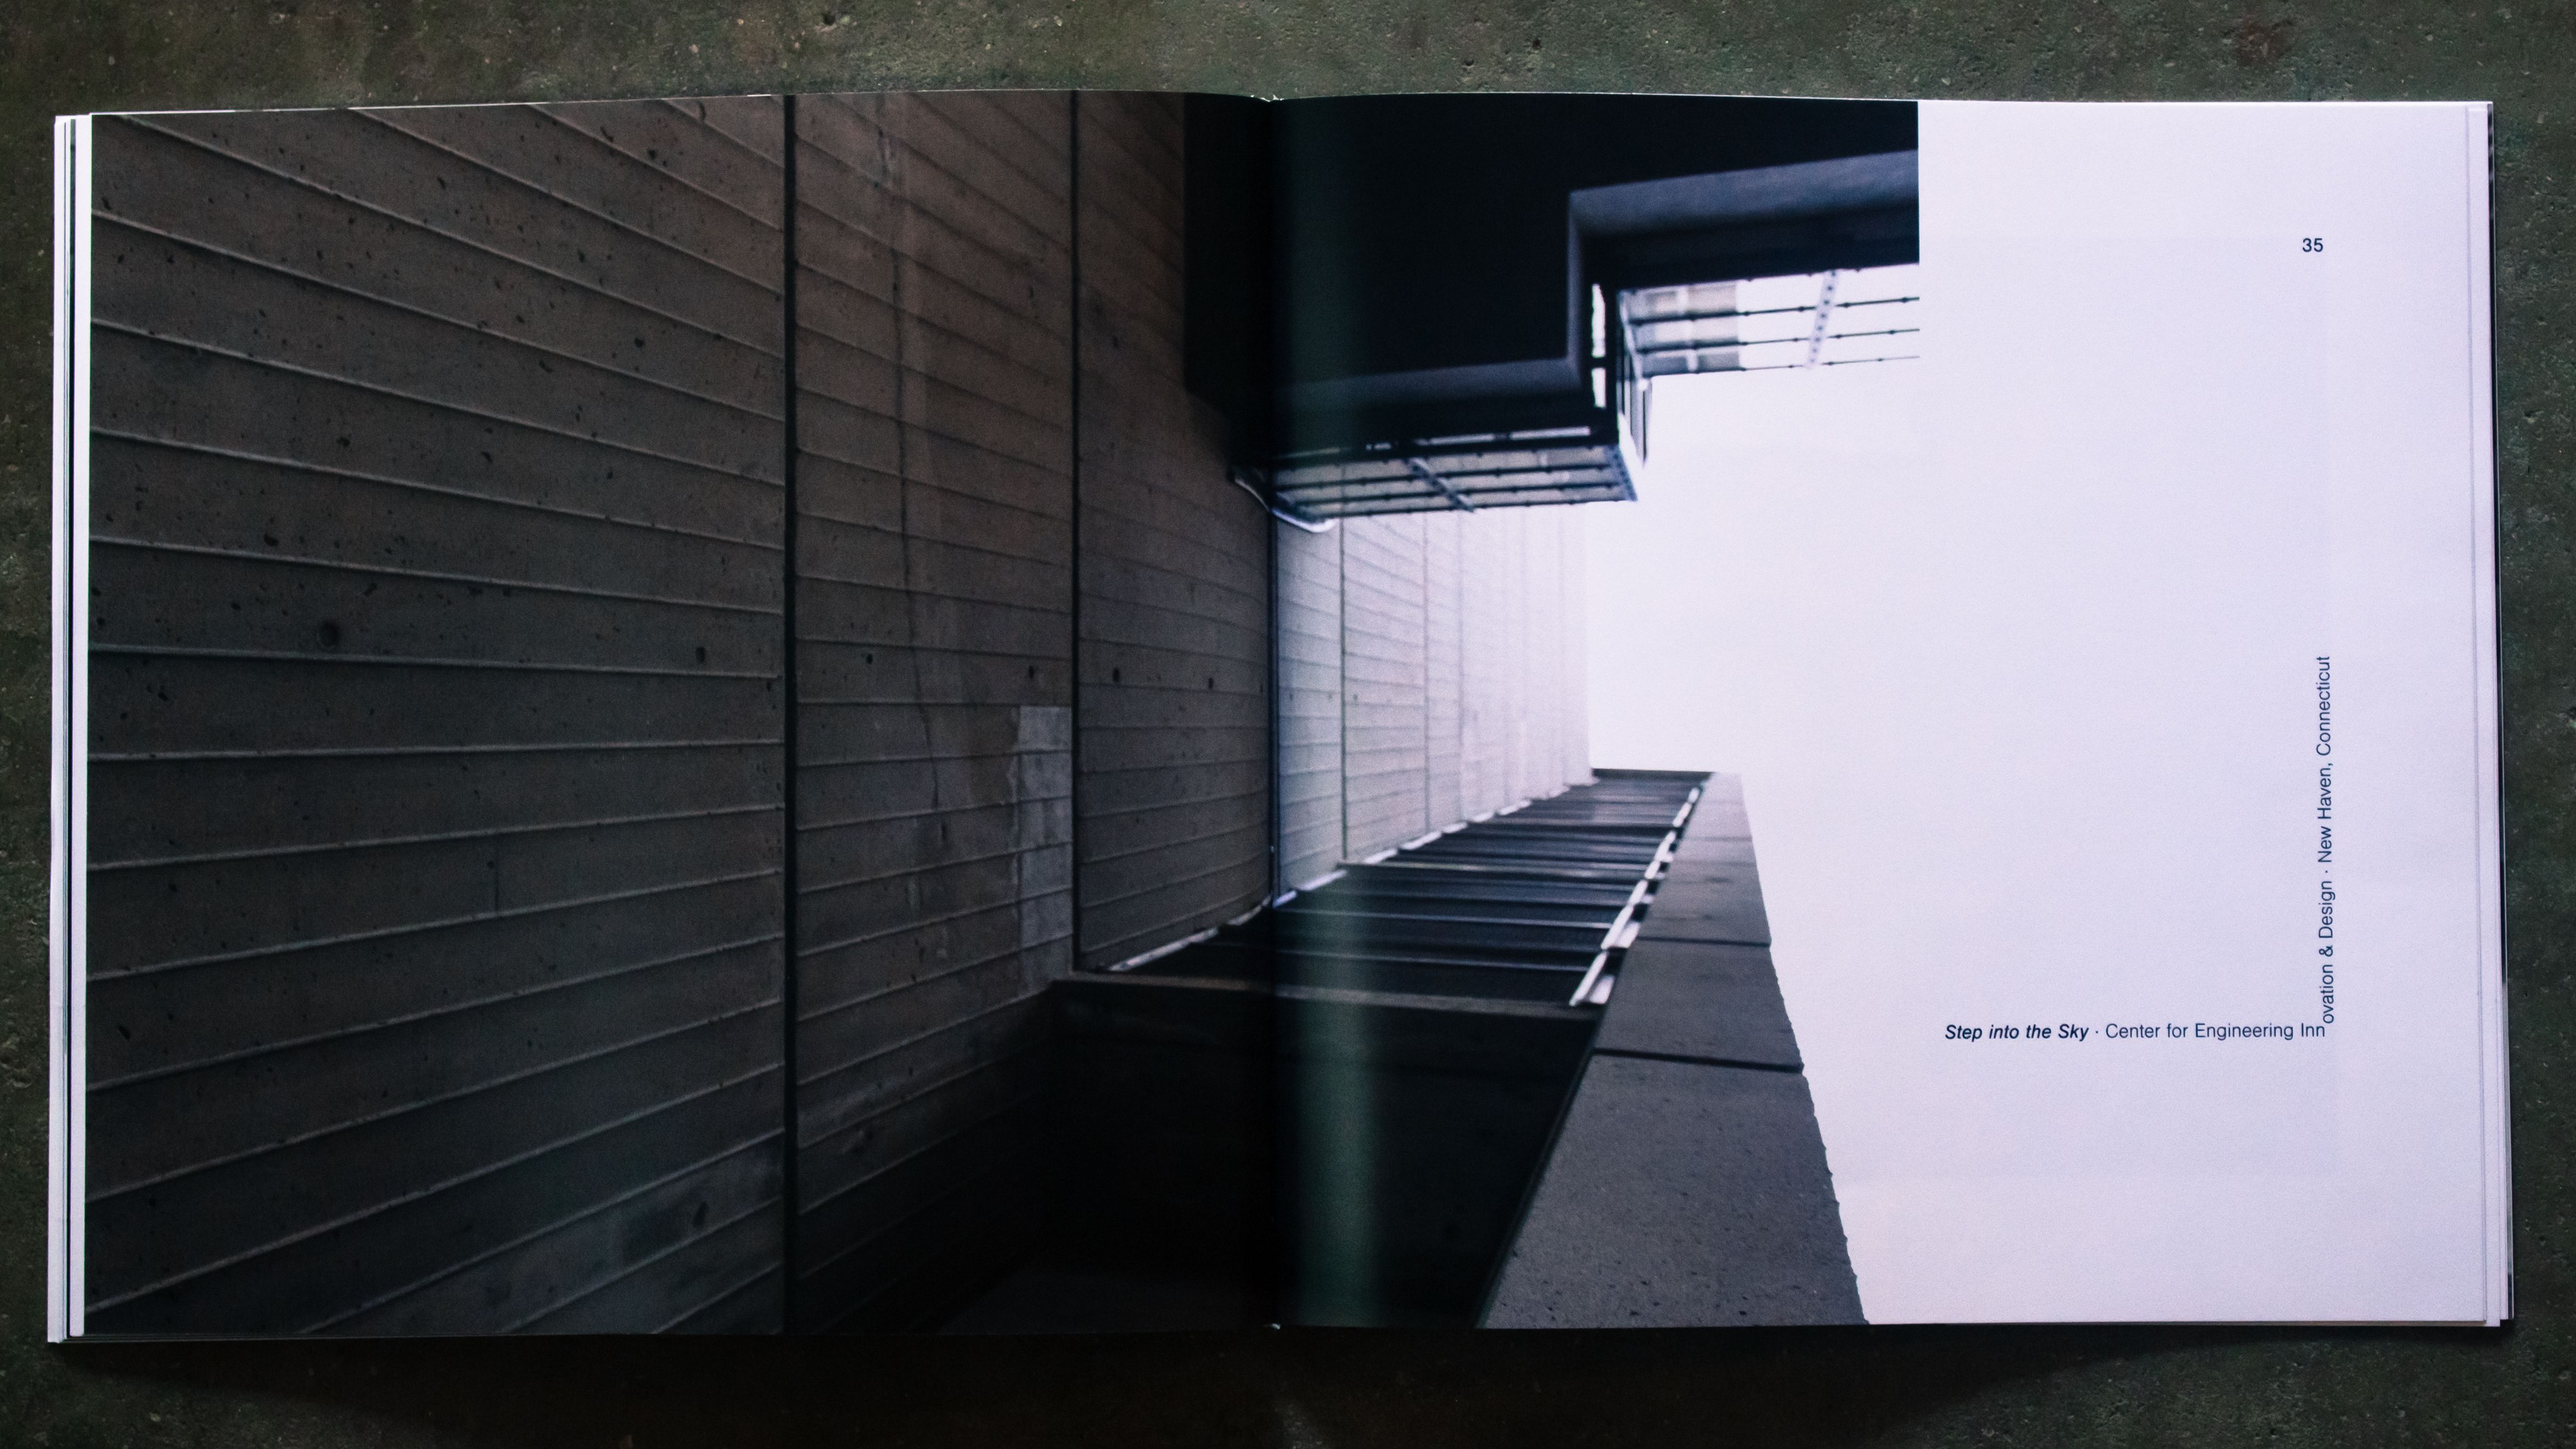 A spread with angled typography and a brutalist concrete building.